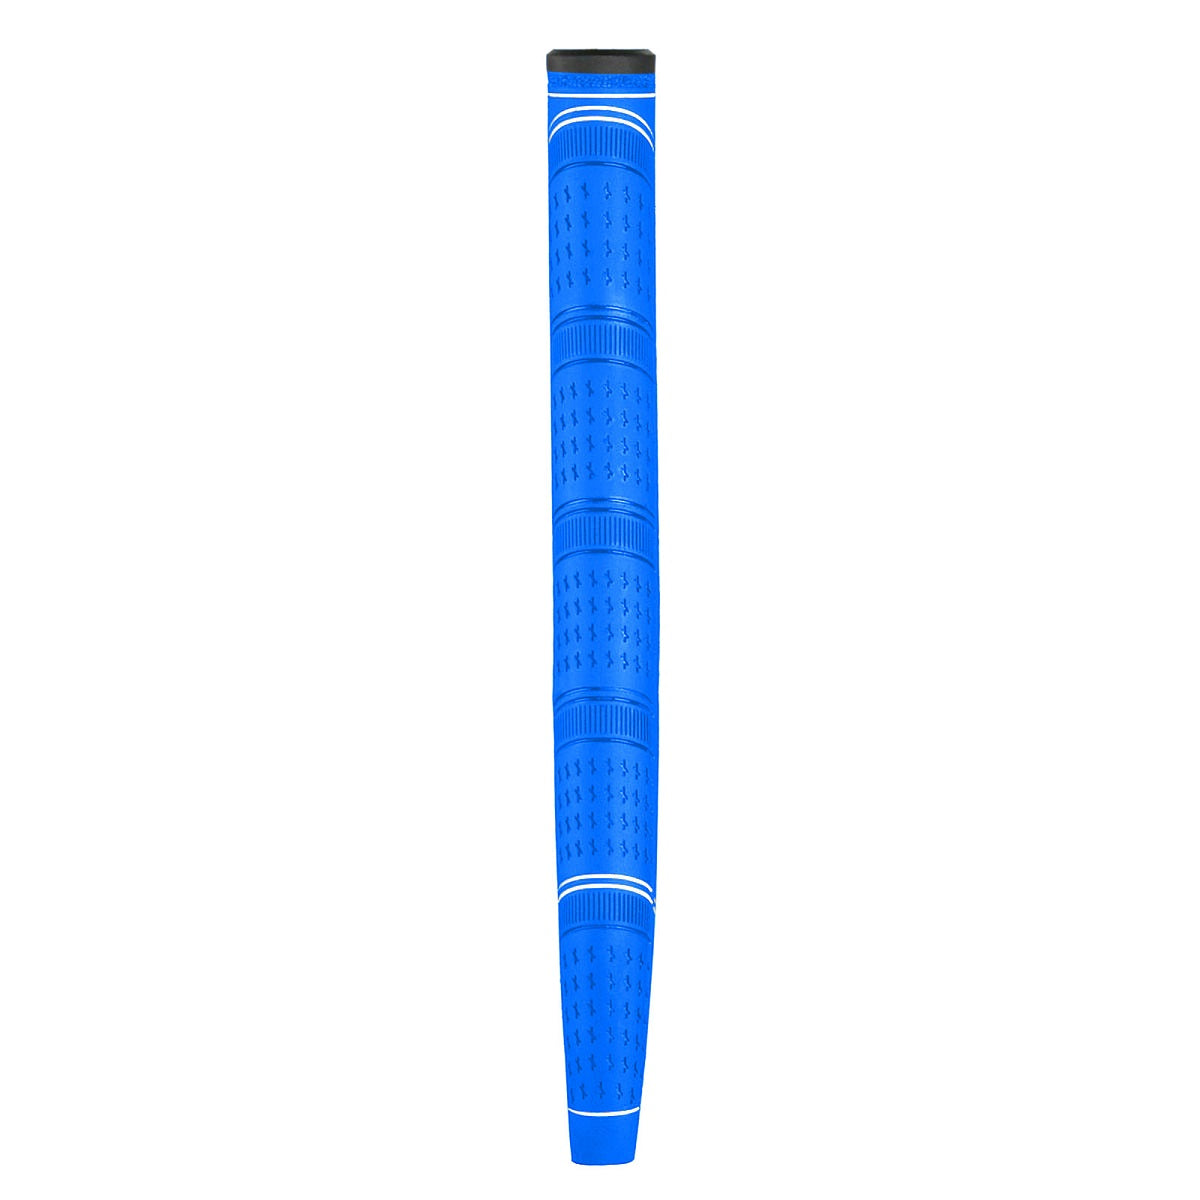 back view of the Karma Dual Touch Blue Midsize Putter Grip